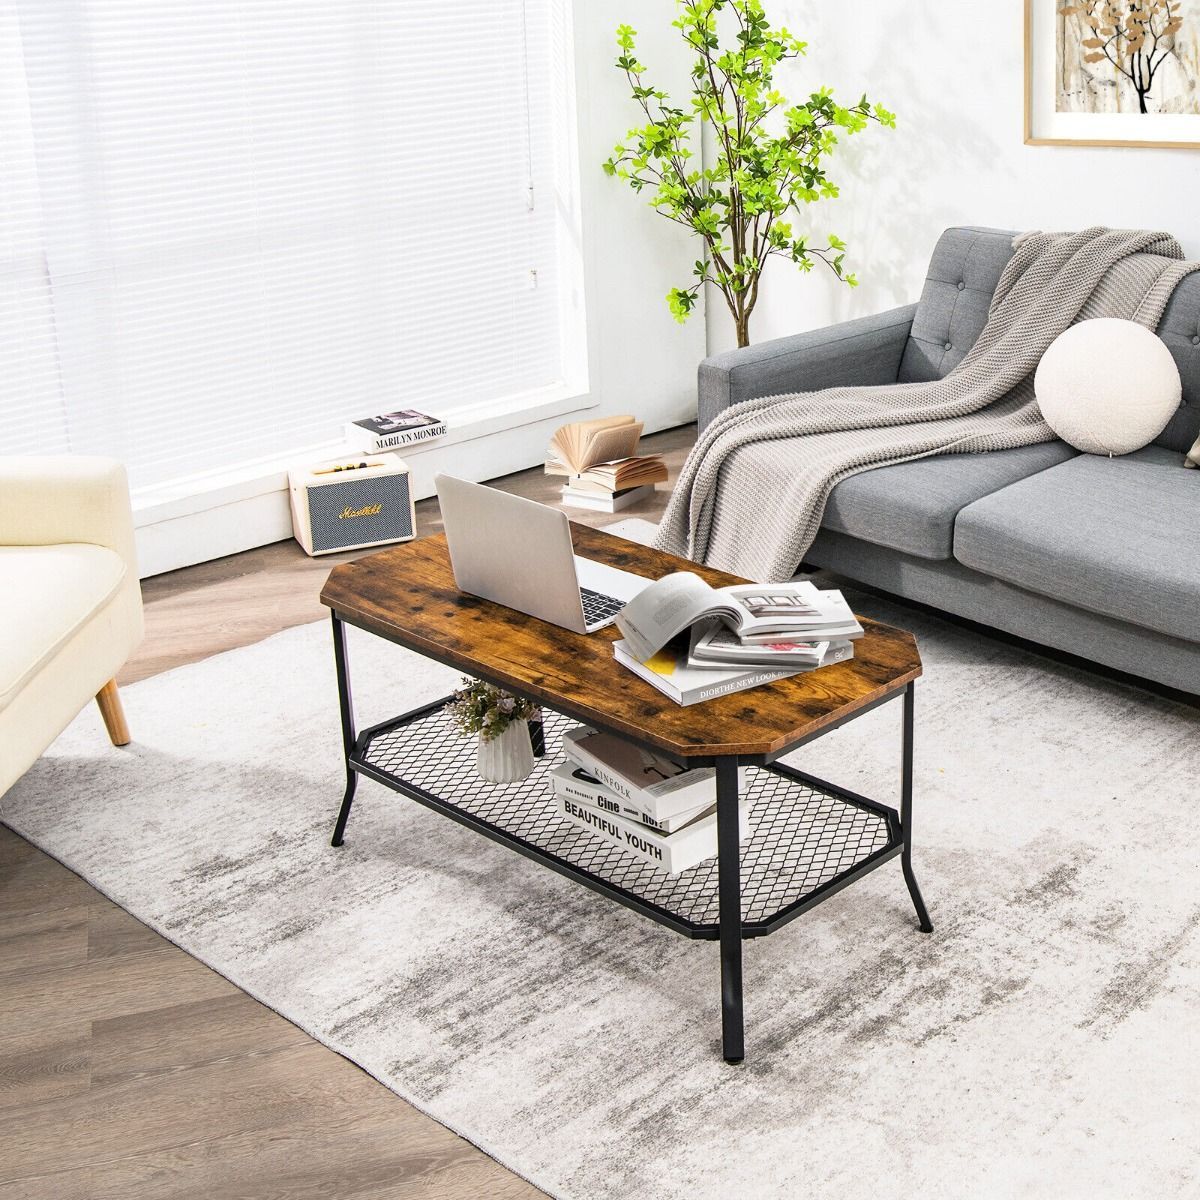 2 Tier Industrial Coffee Table With Open Metal Mesh Shelf For Sale |  Zevelop Uk Within Metal 1 Shelf Coffee Tables (Photo 11 of 15)